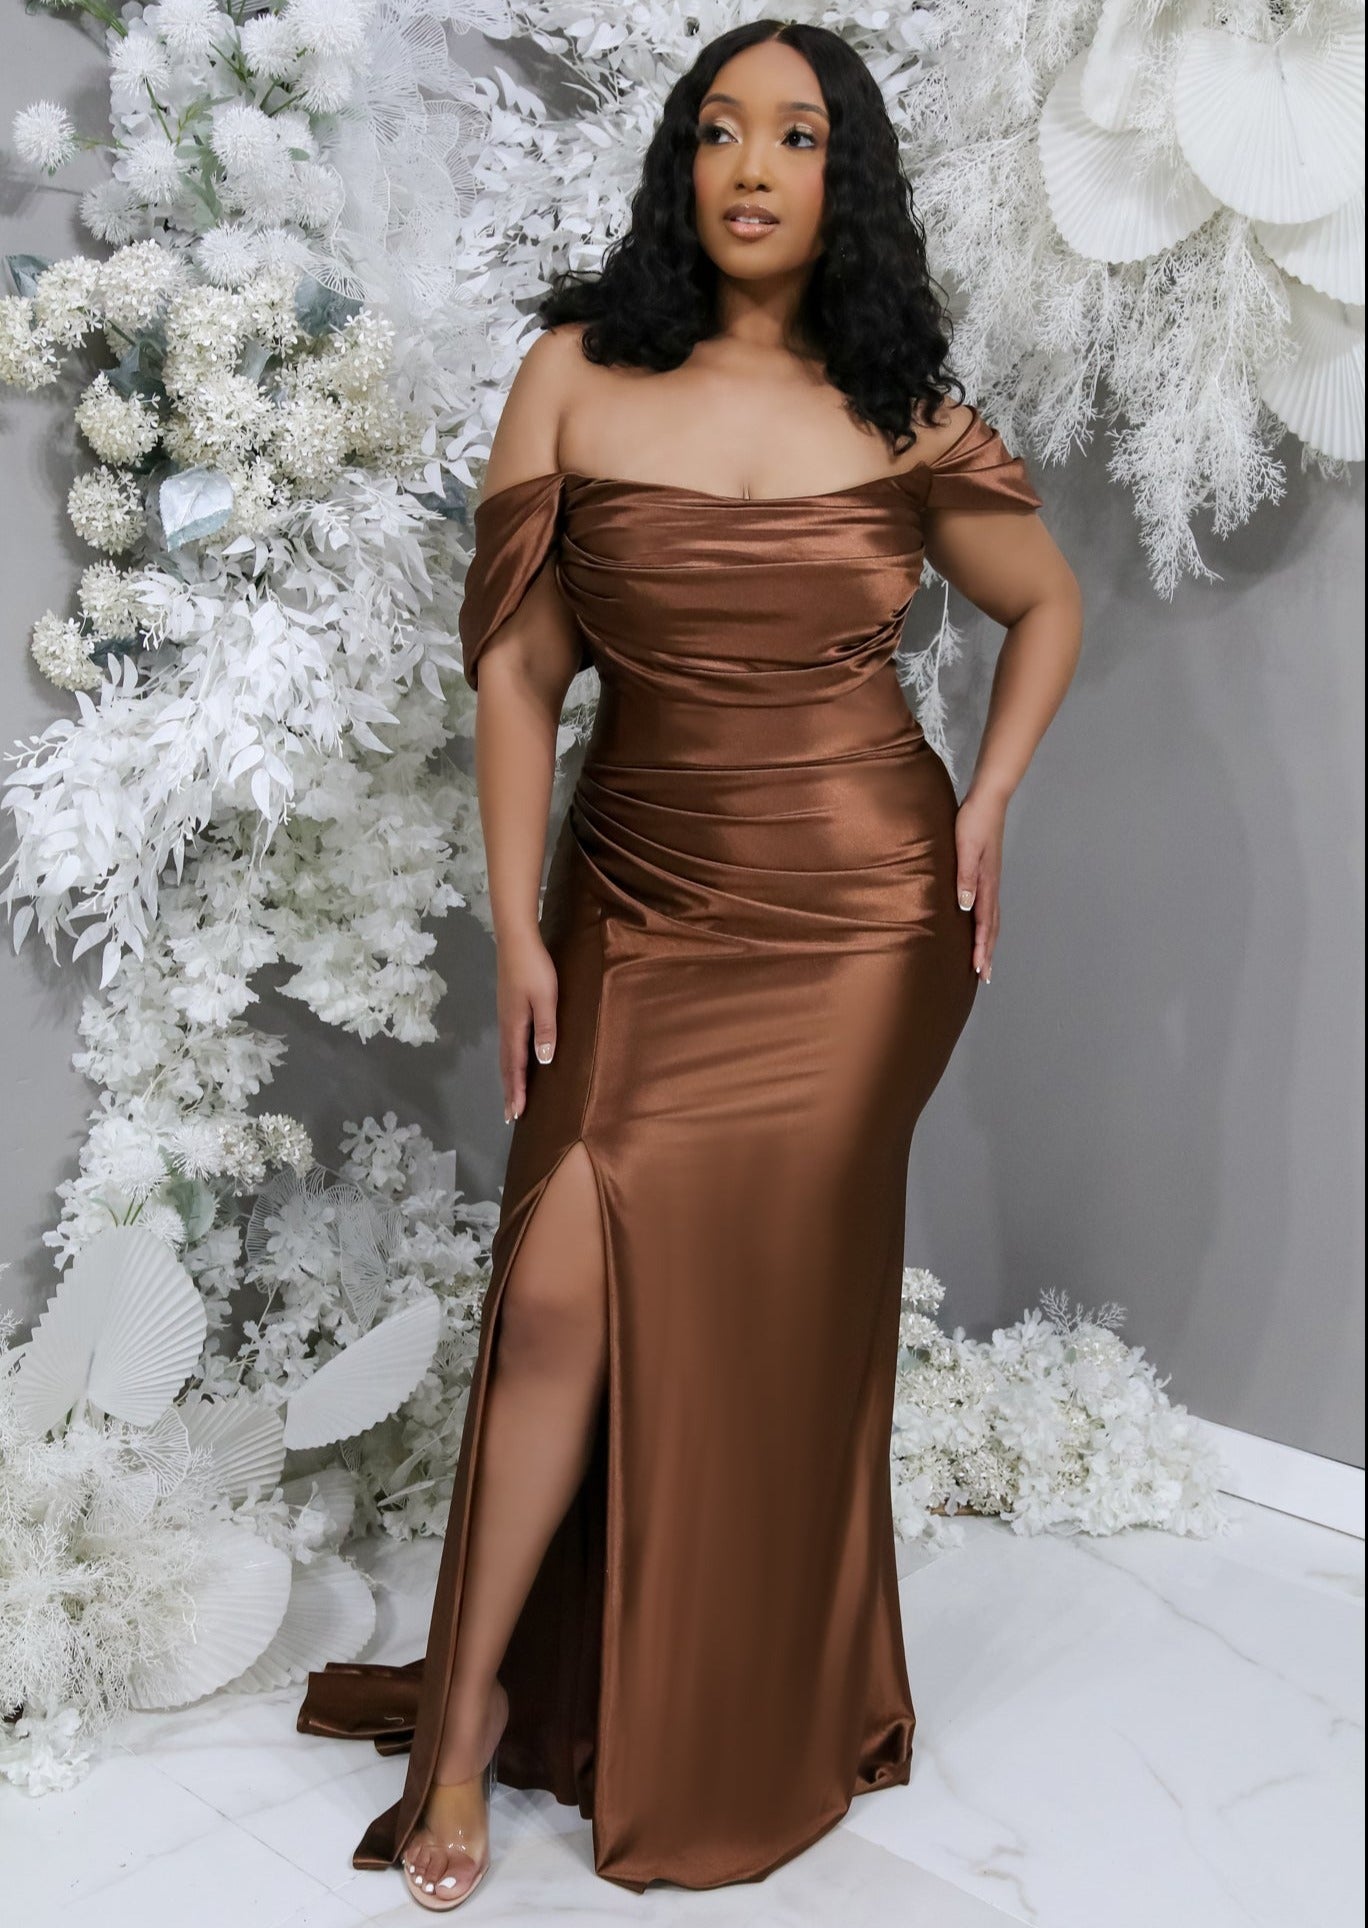 Fitted chocolate stretch satin bridesmaid dress with off-the-shoulder detailing, ruching, and slit on plus-size model